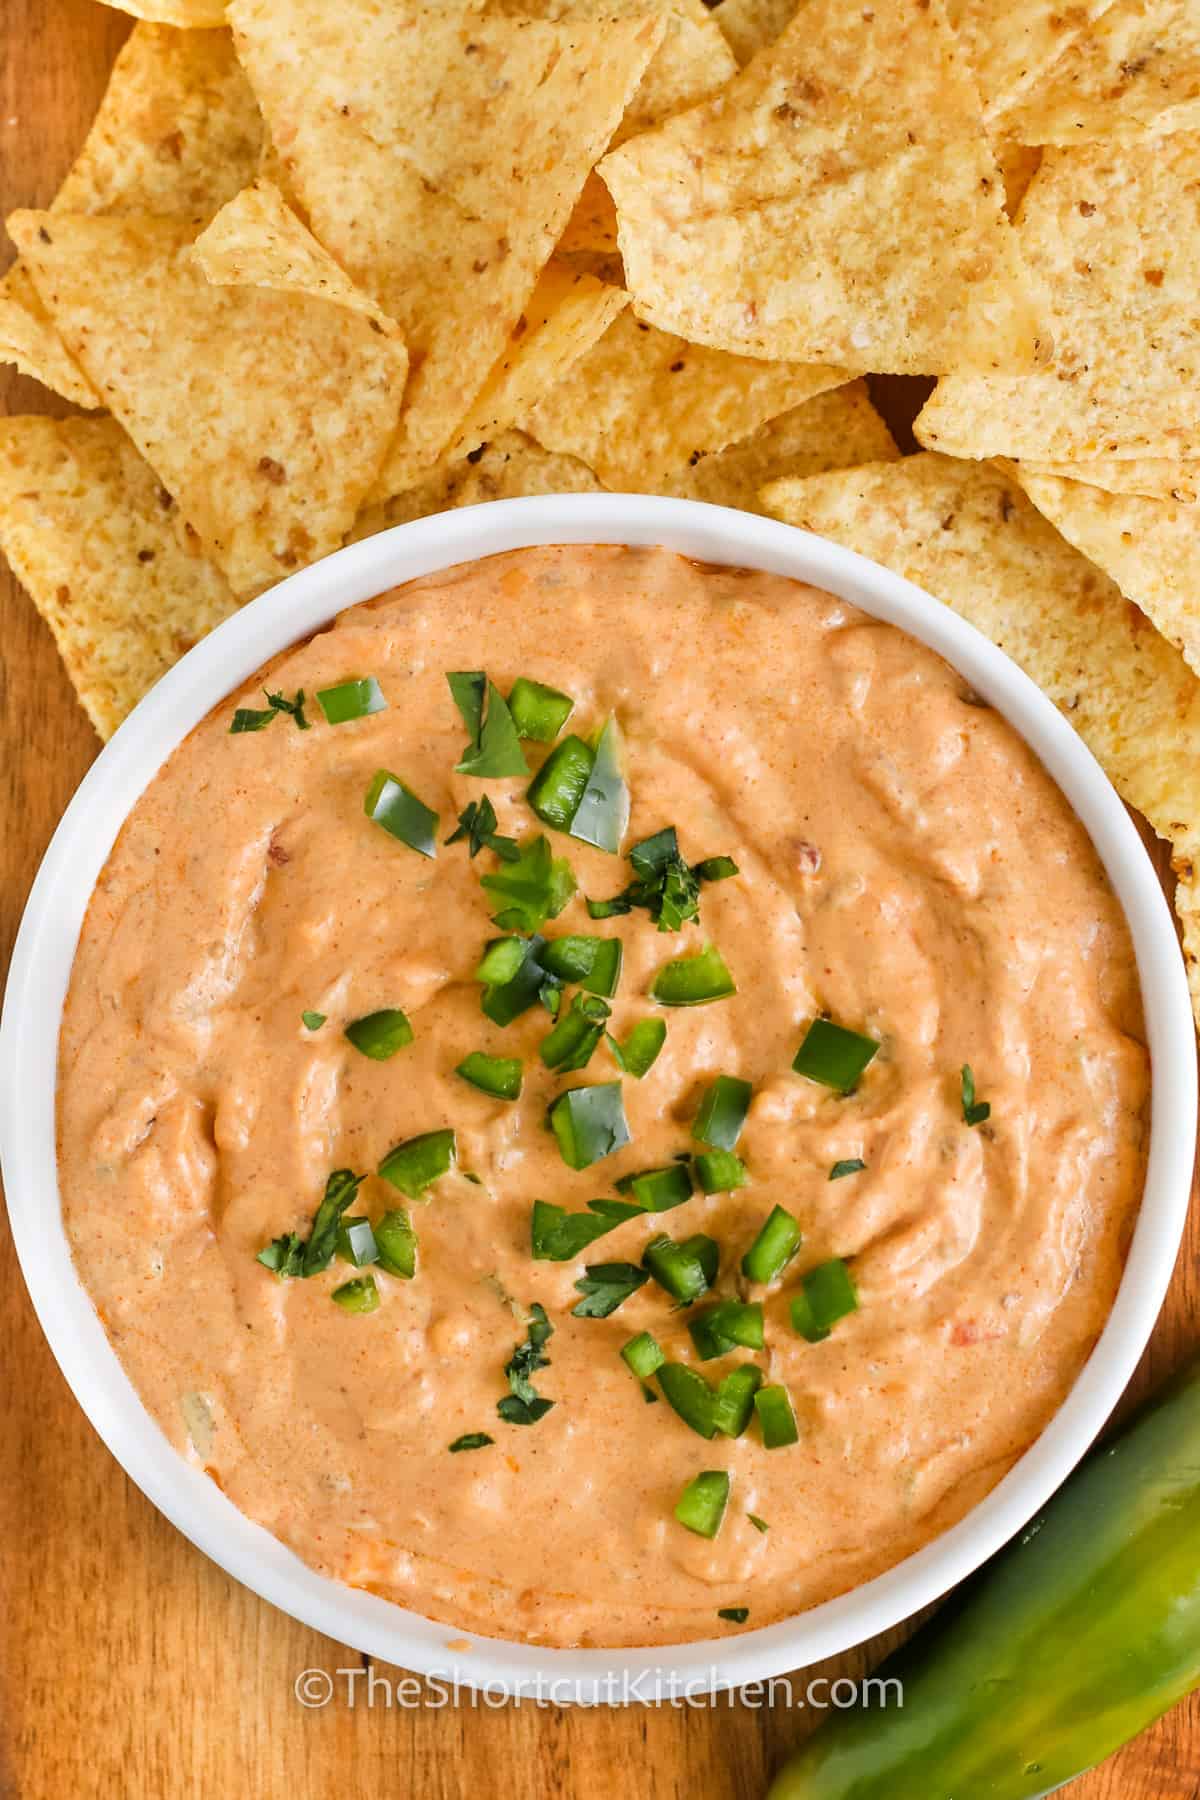 Chili Cheese Dip Recipe in a bowl with chips